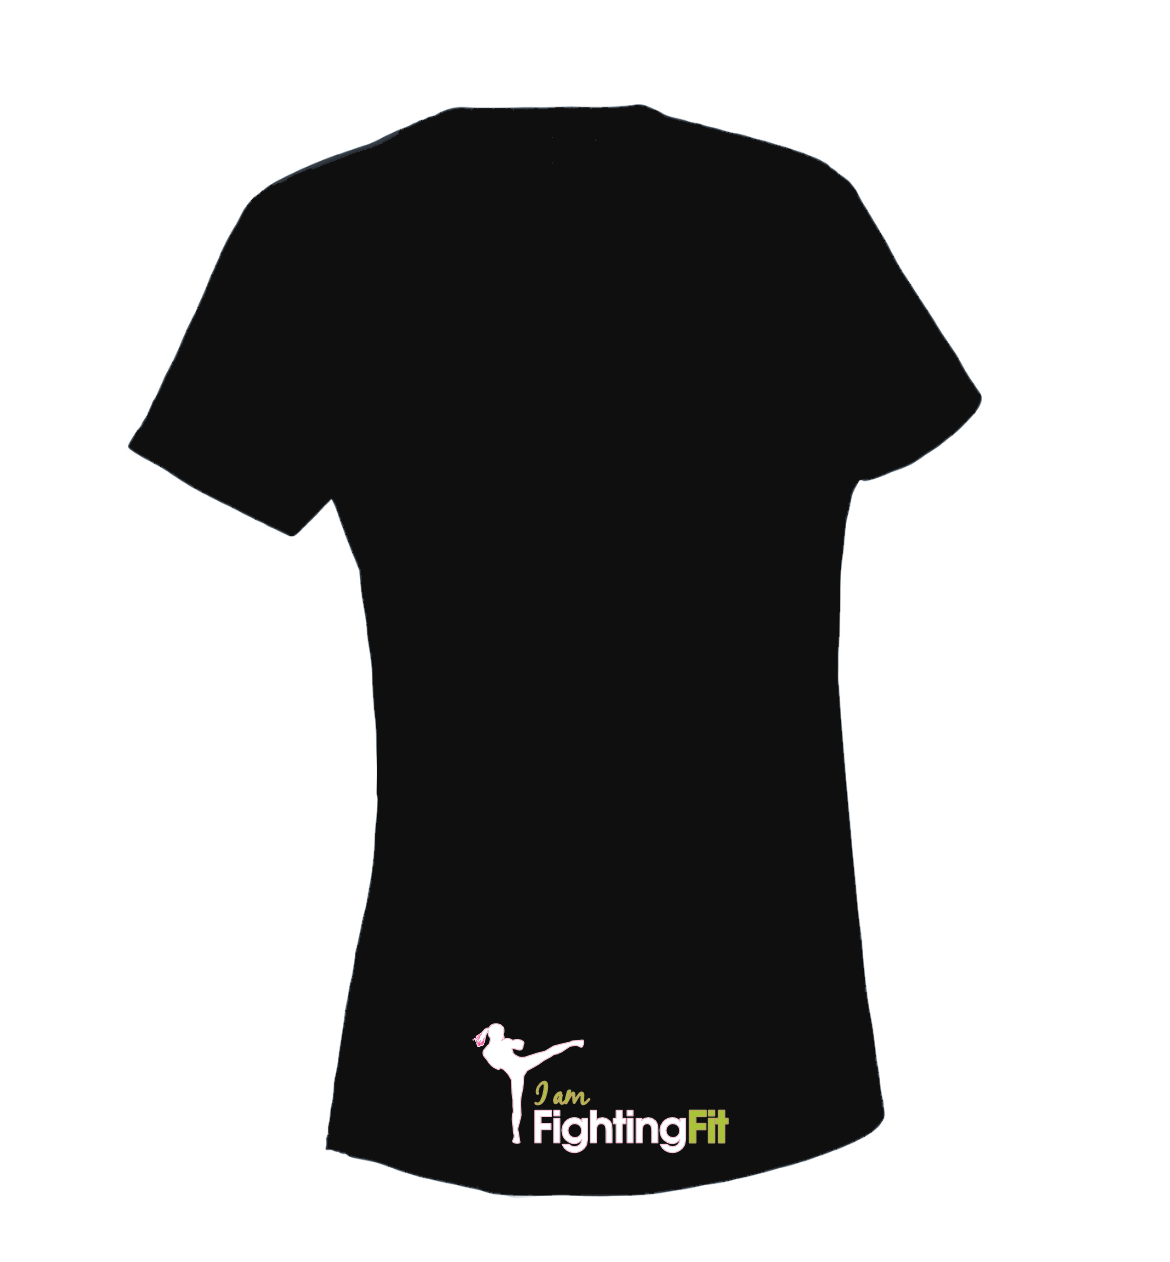 Fighting Fit Together Black Tee